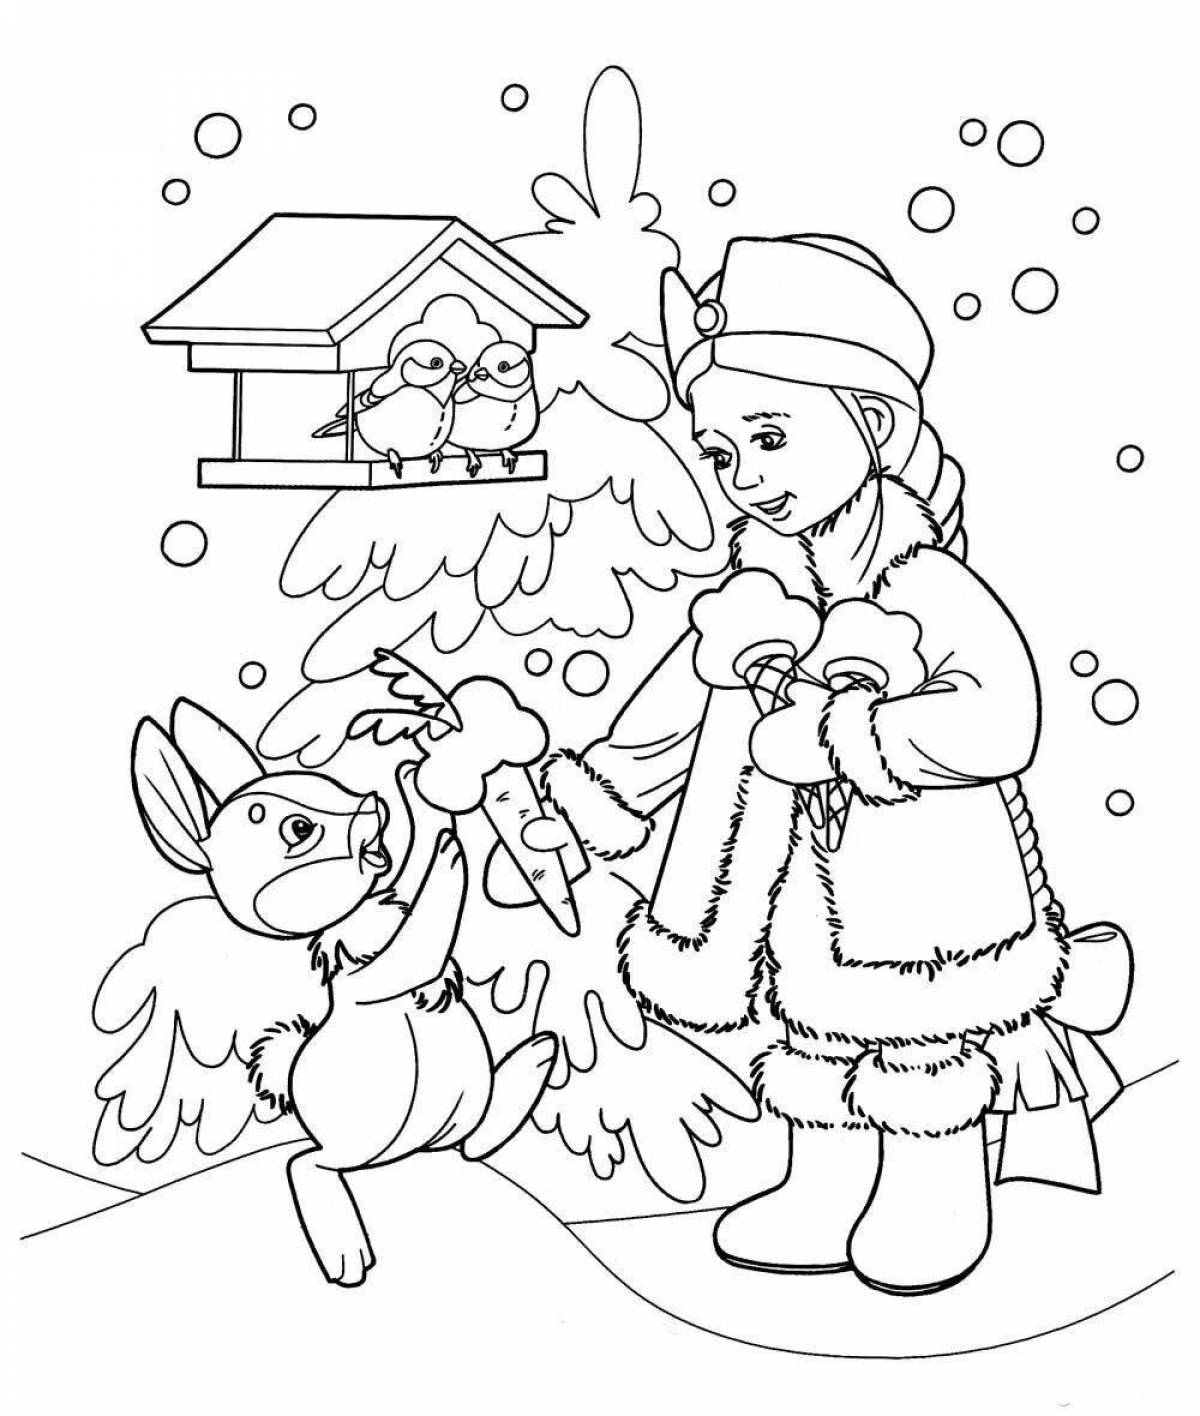 Coloring playful snow maiden